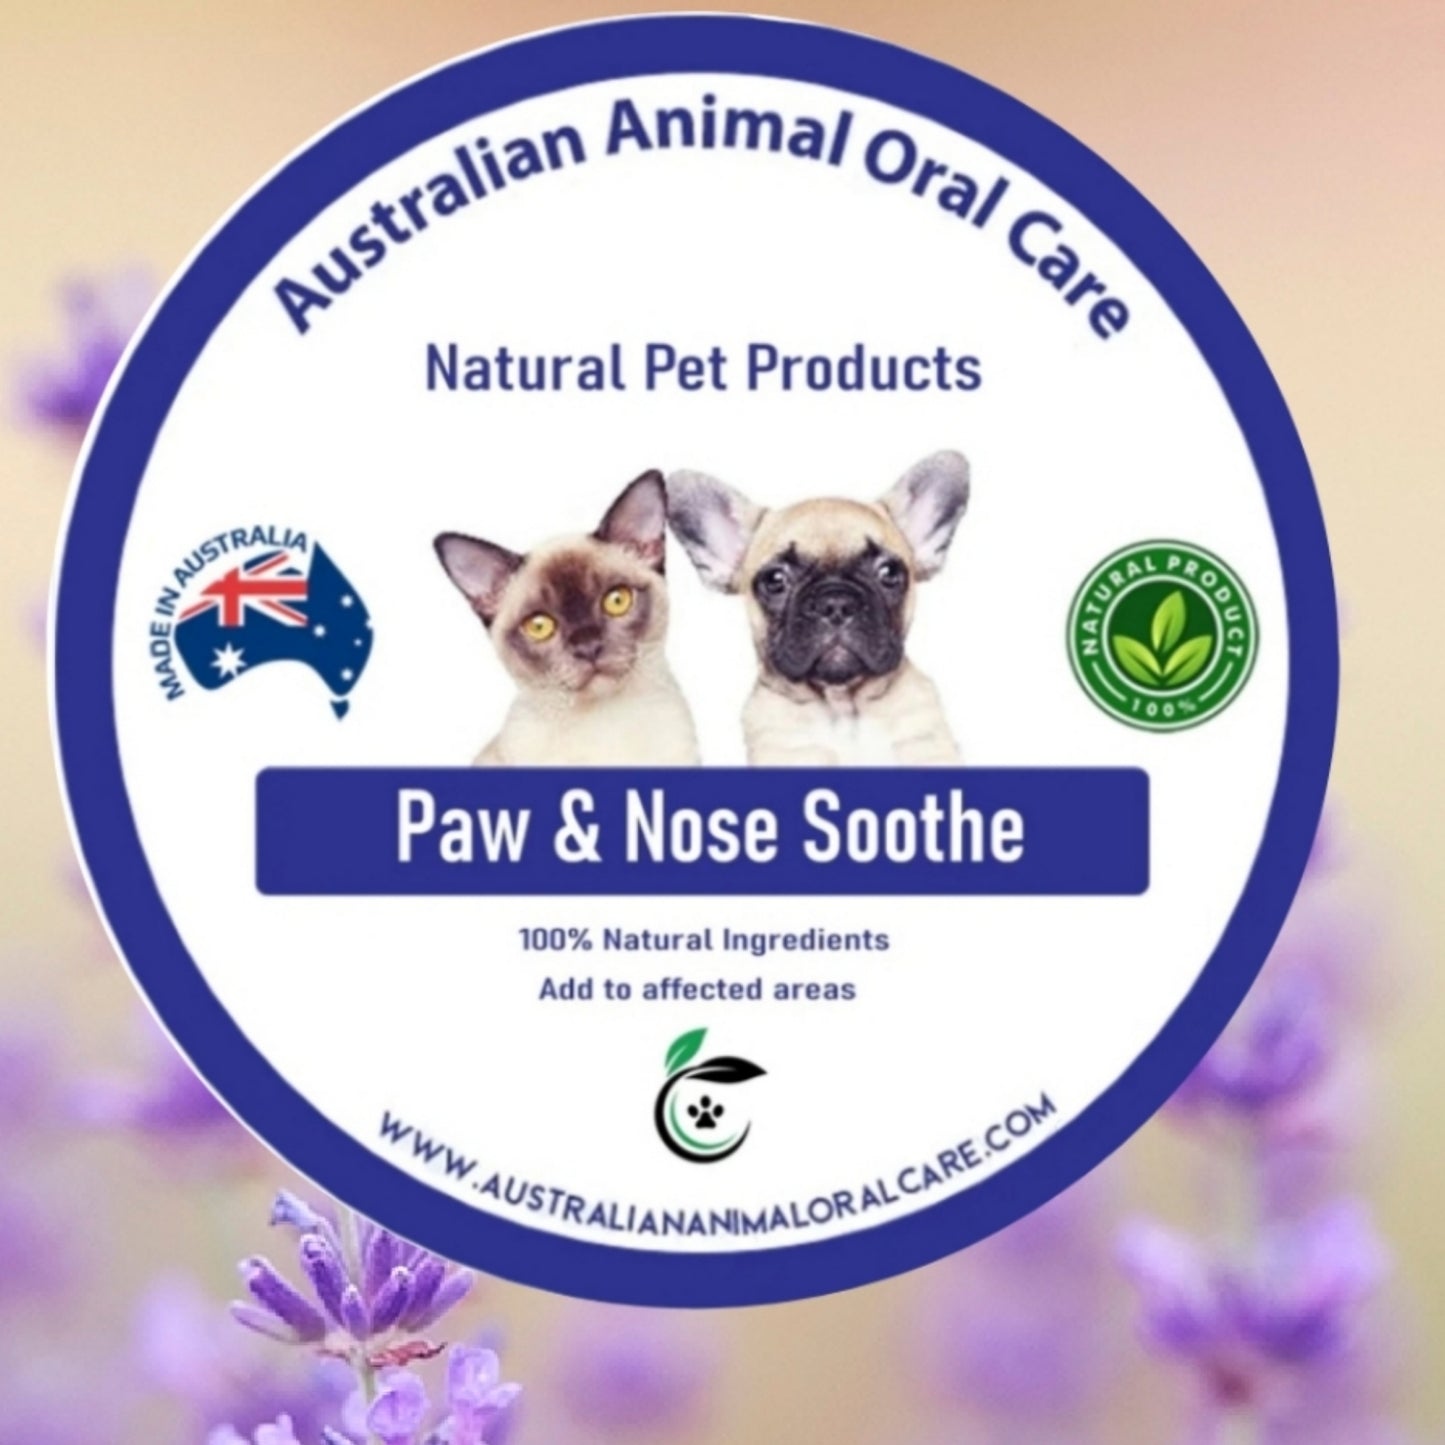 Paw & Nose Soothe